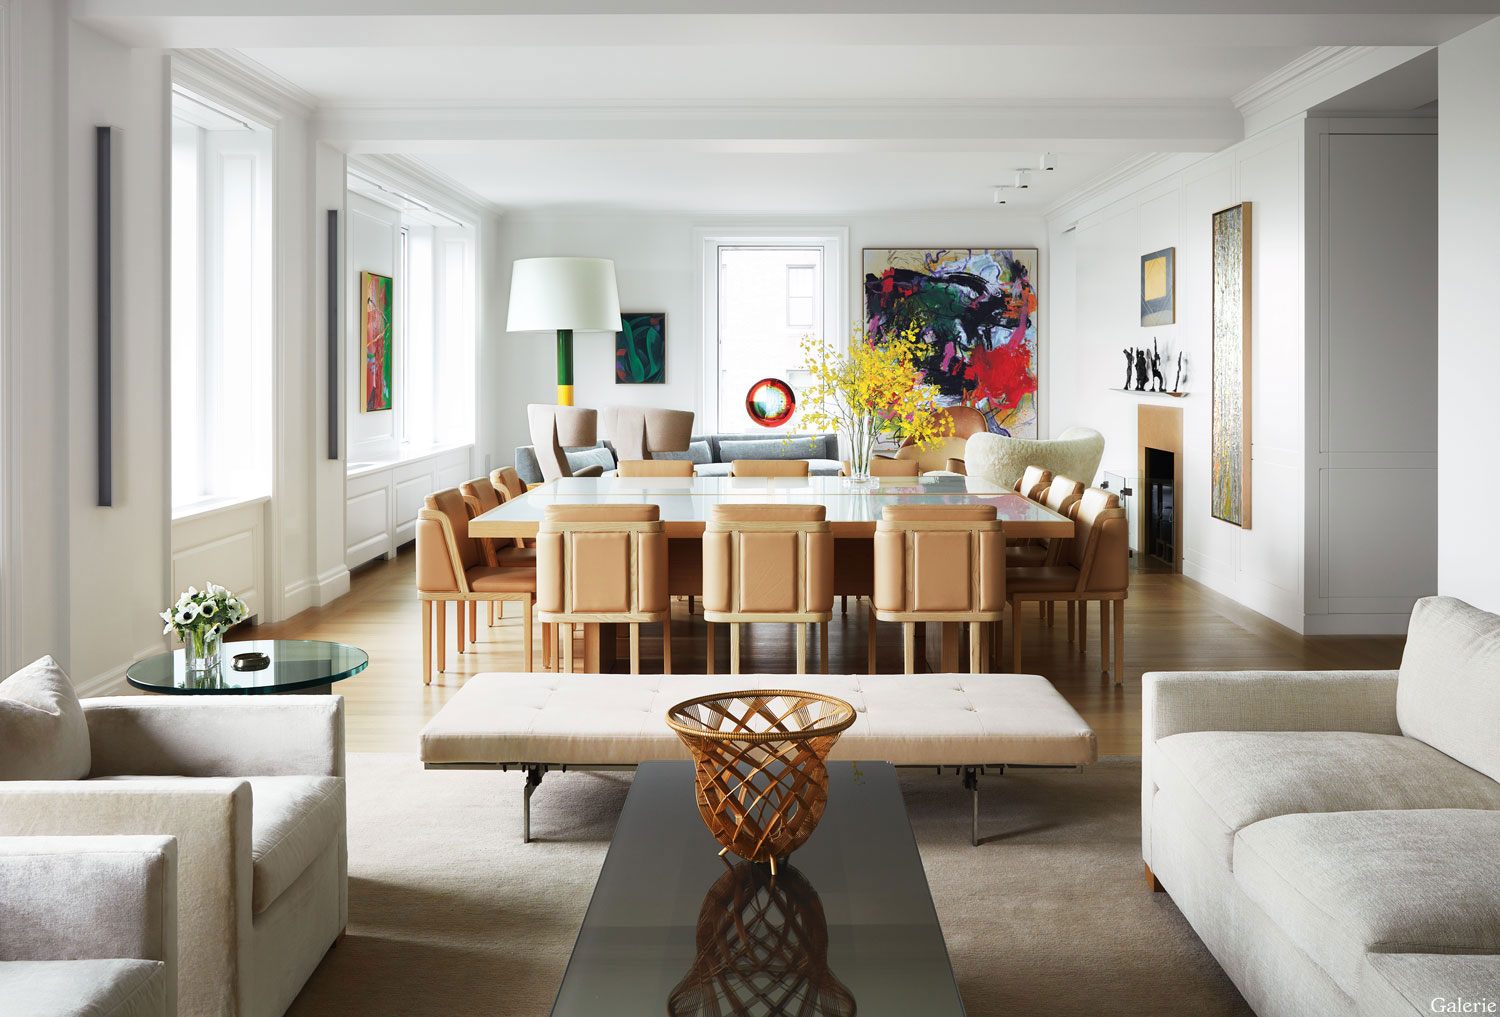 Go Inside Lee F. Mindel’s Masterful Renovation of One of His Own New ...